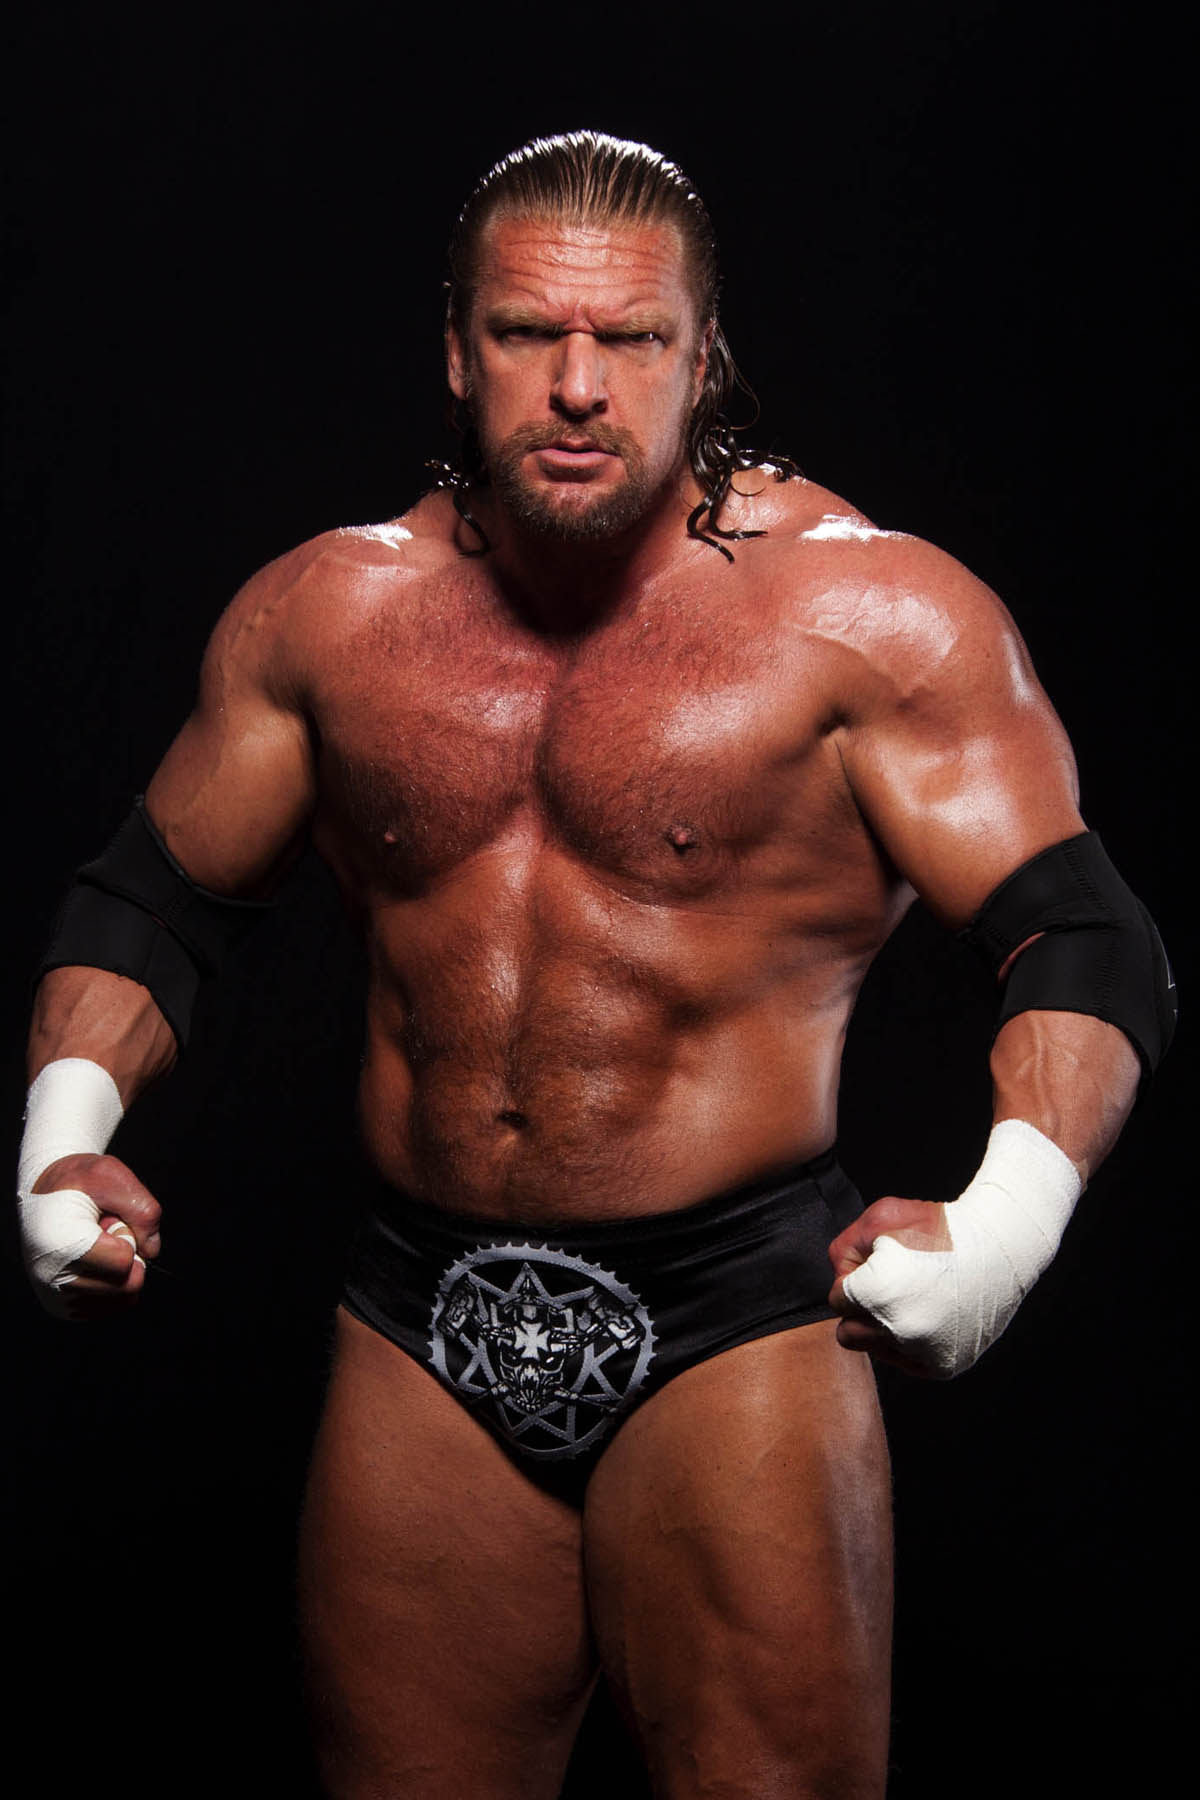 Triple H discusses the end of one era and beginning of another for WWE